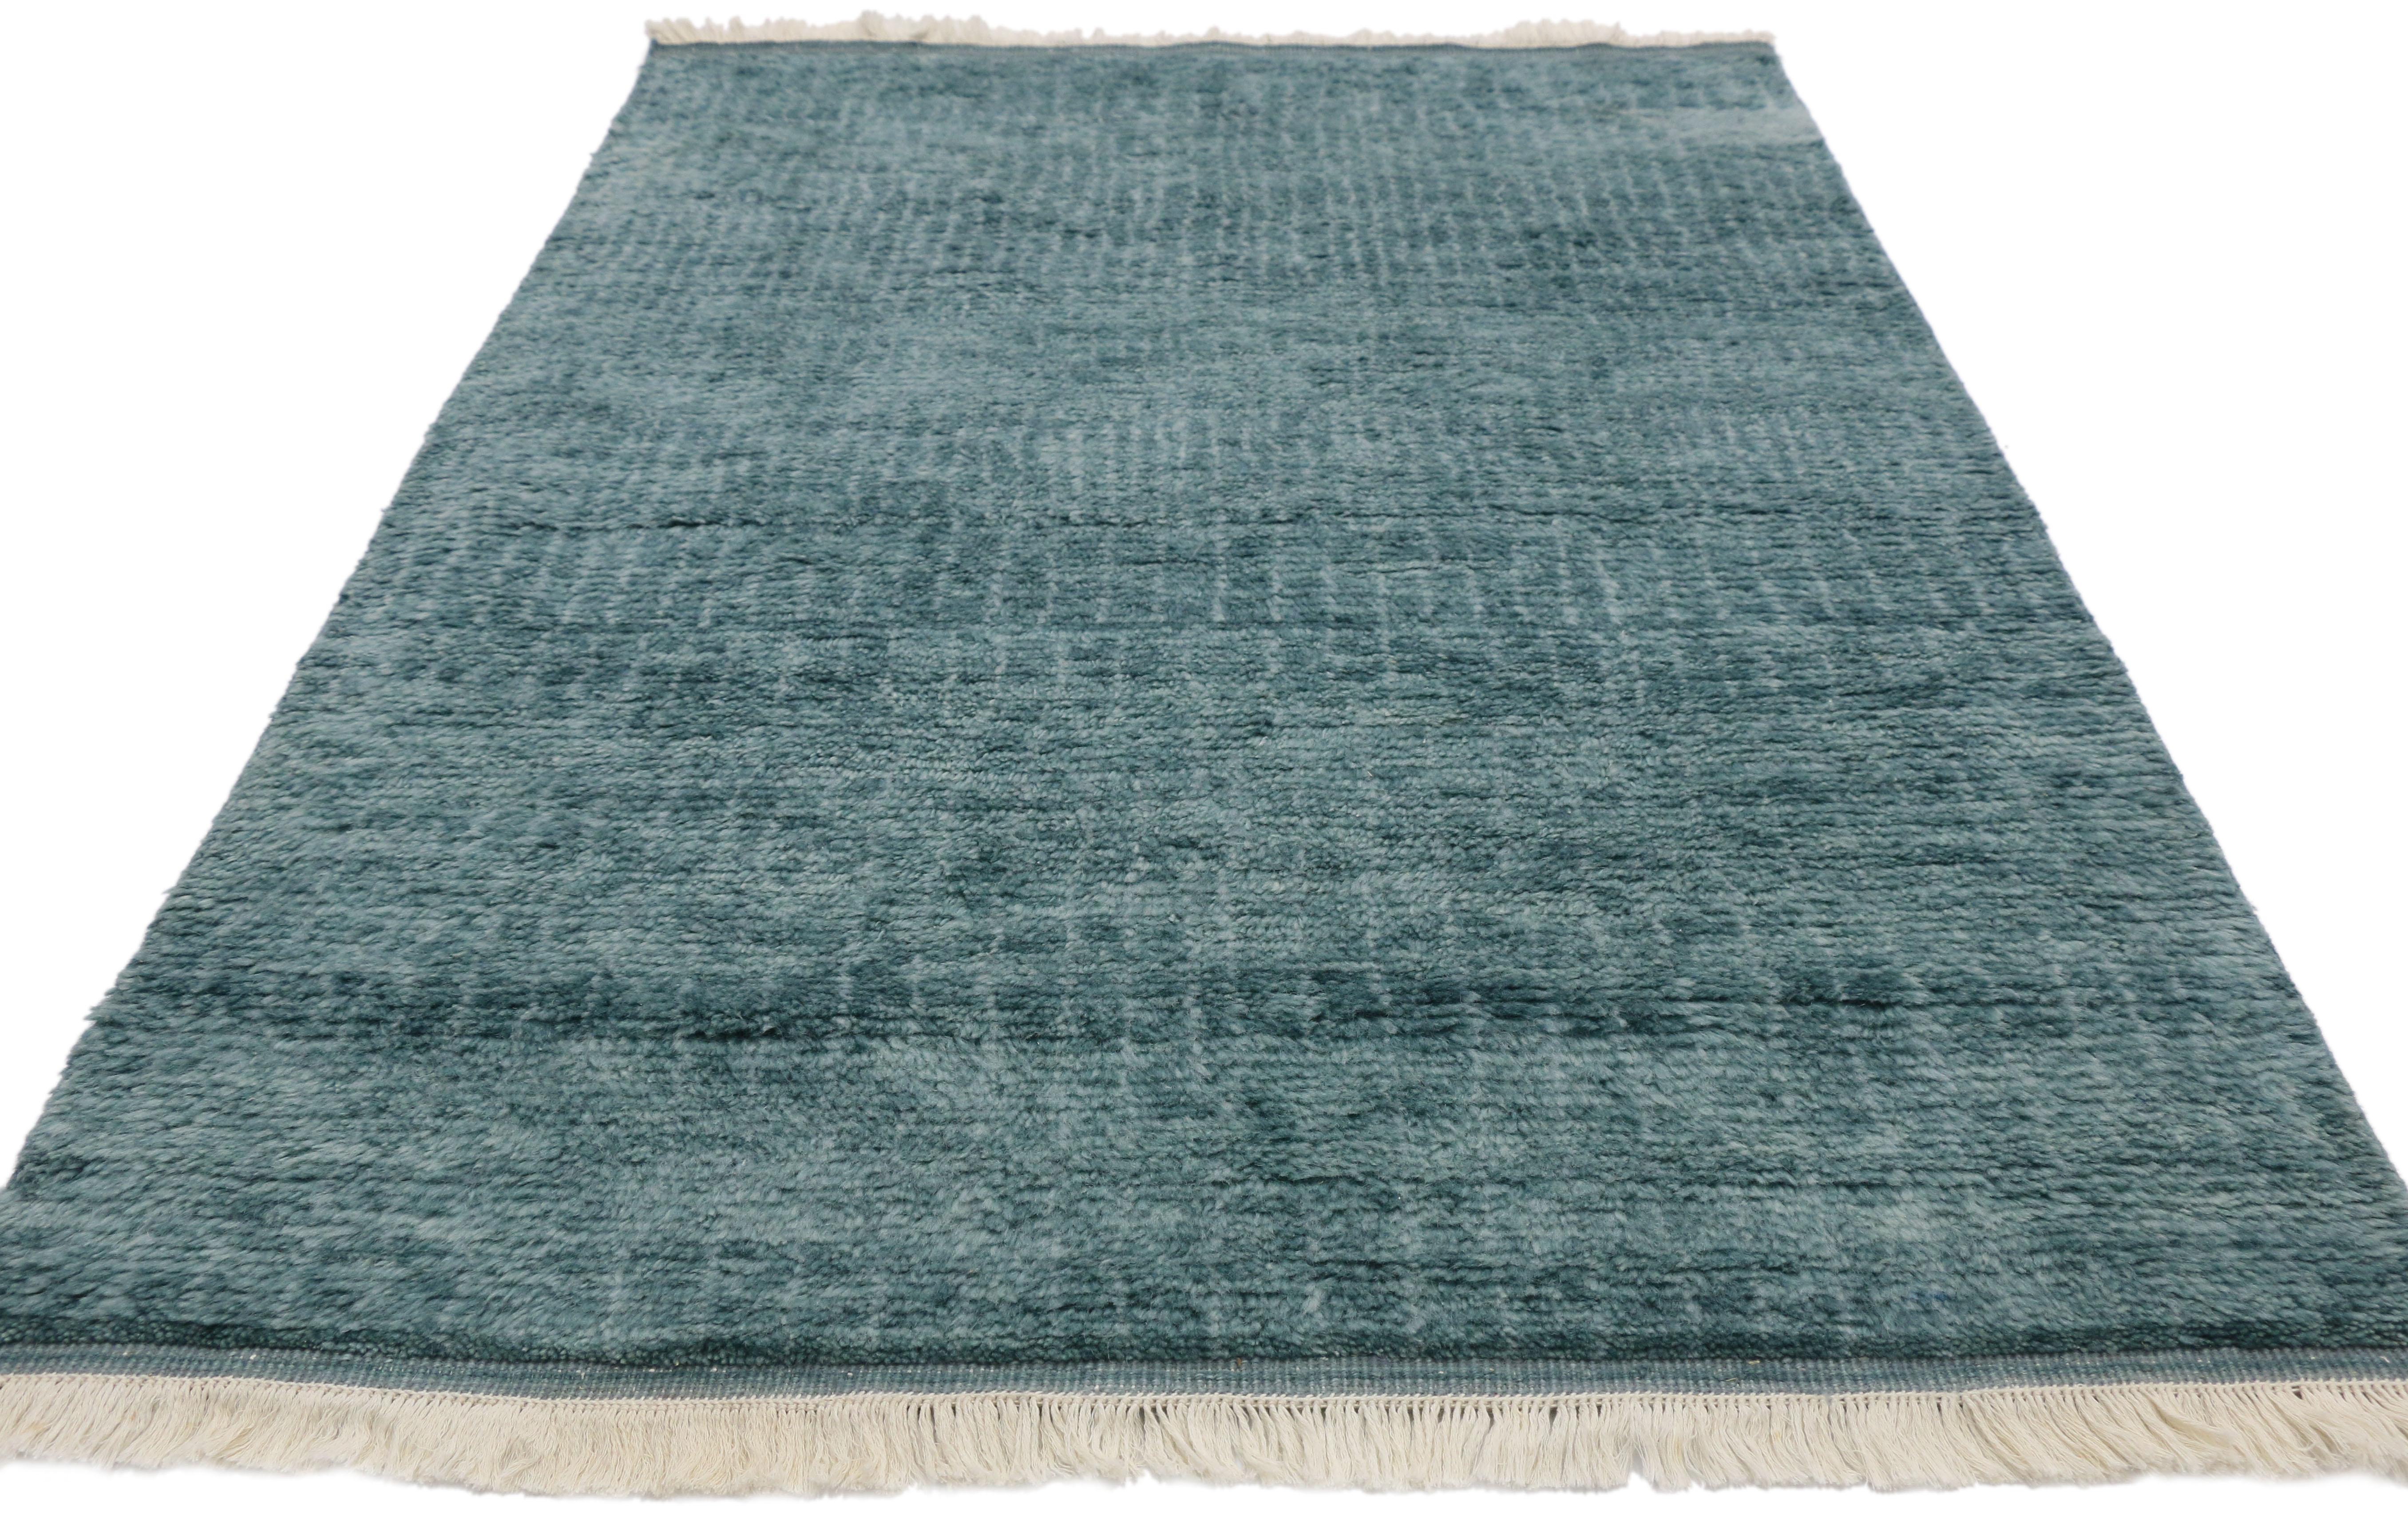 Expressionist New Contemporary Beach Hygge Moroccan Accent Rug with Modern Cape Cod Style